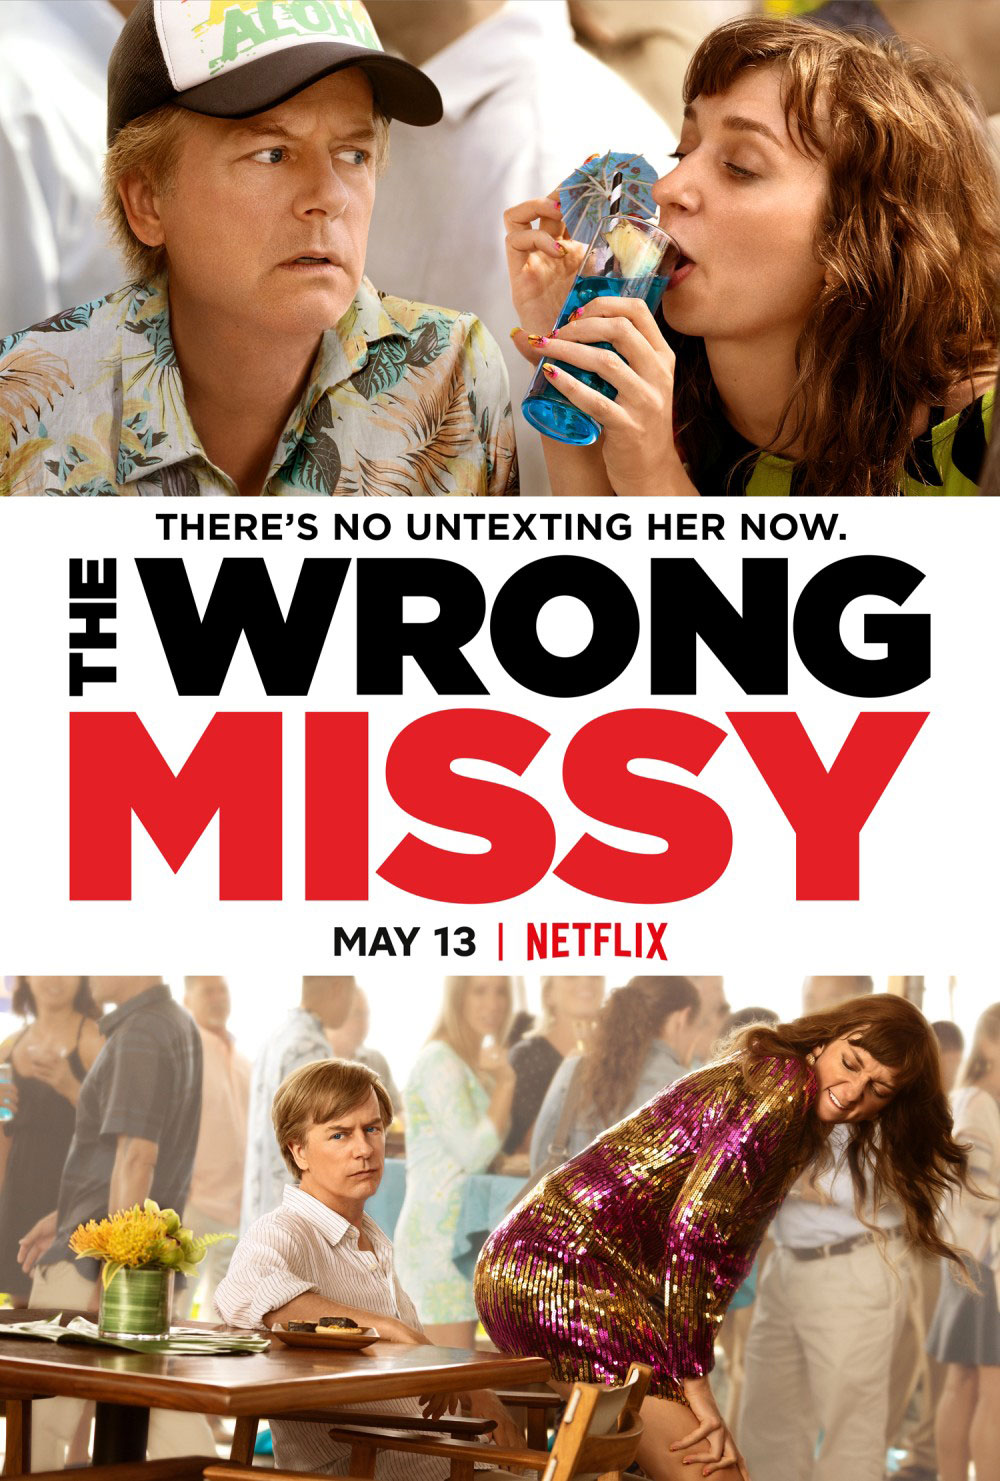 Trailer For David Spade Starring Netflix Comedy The Wrong Missy